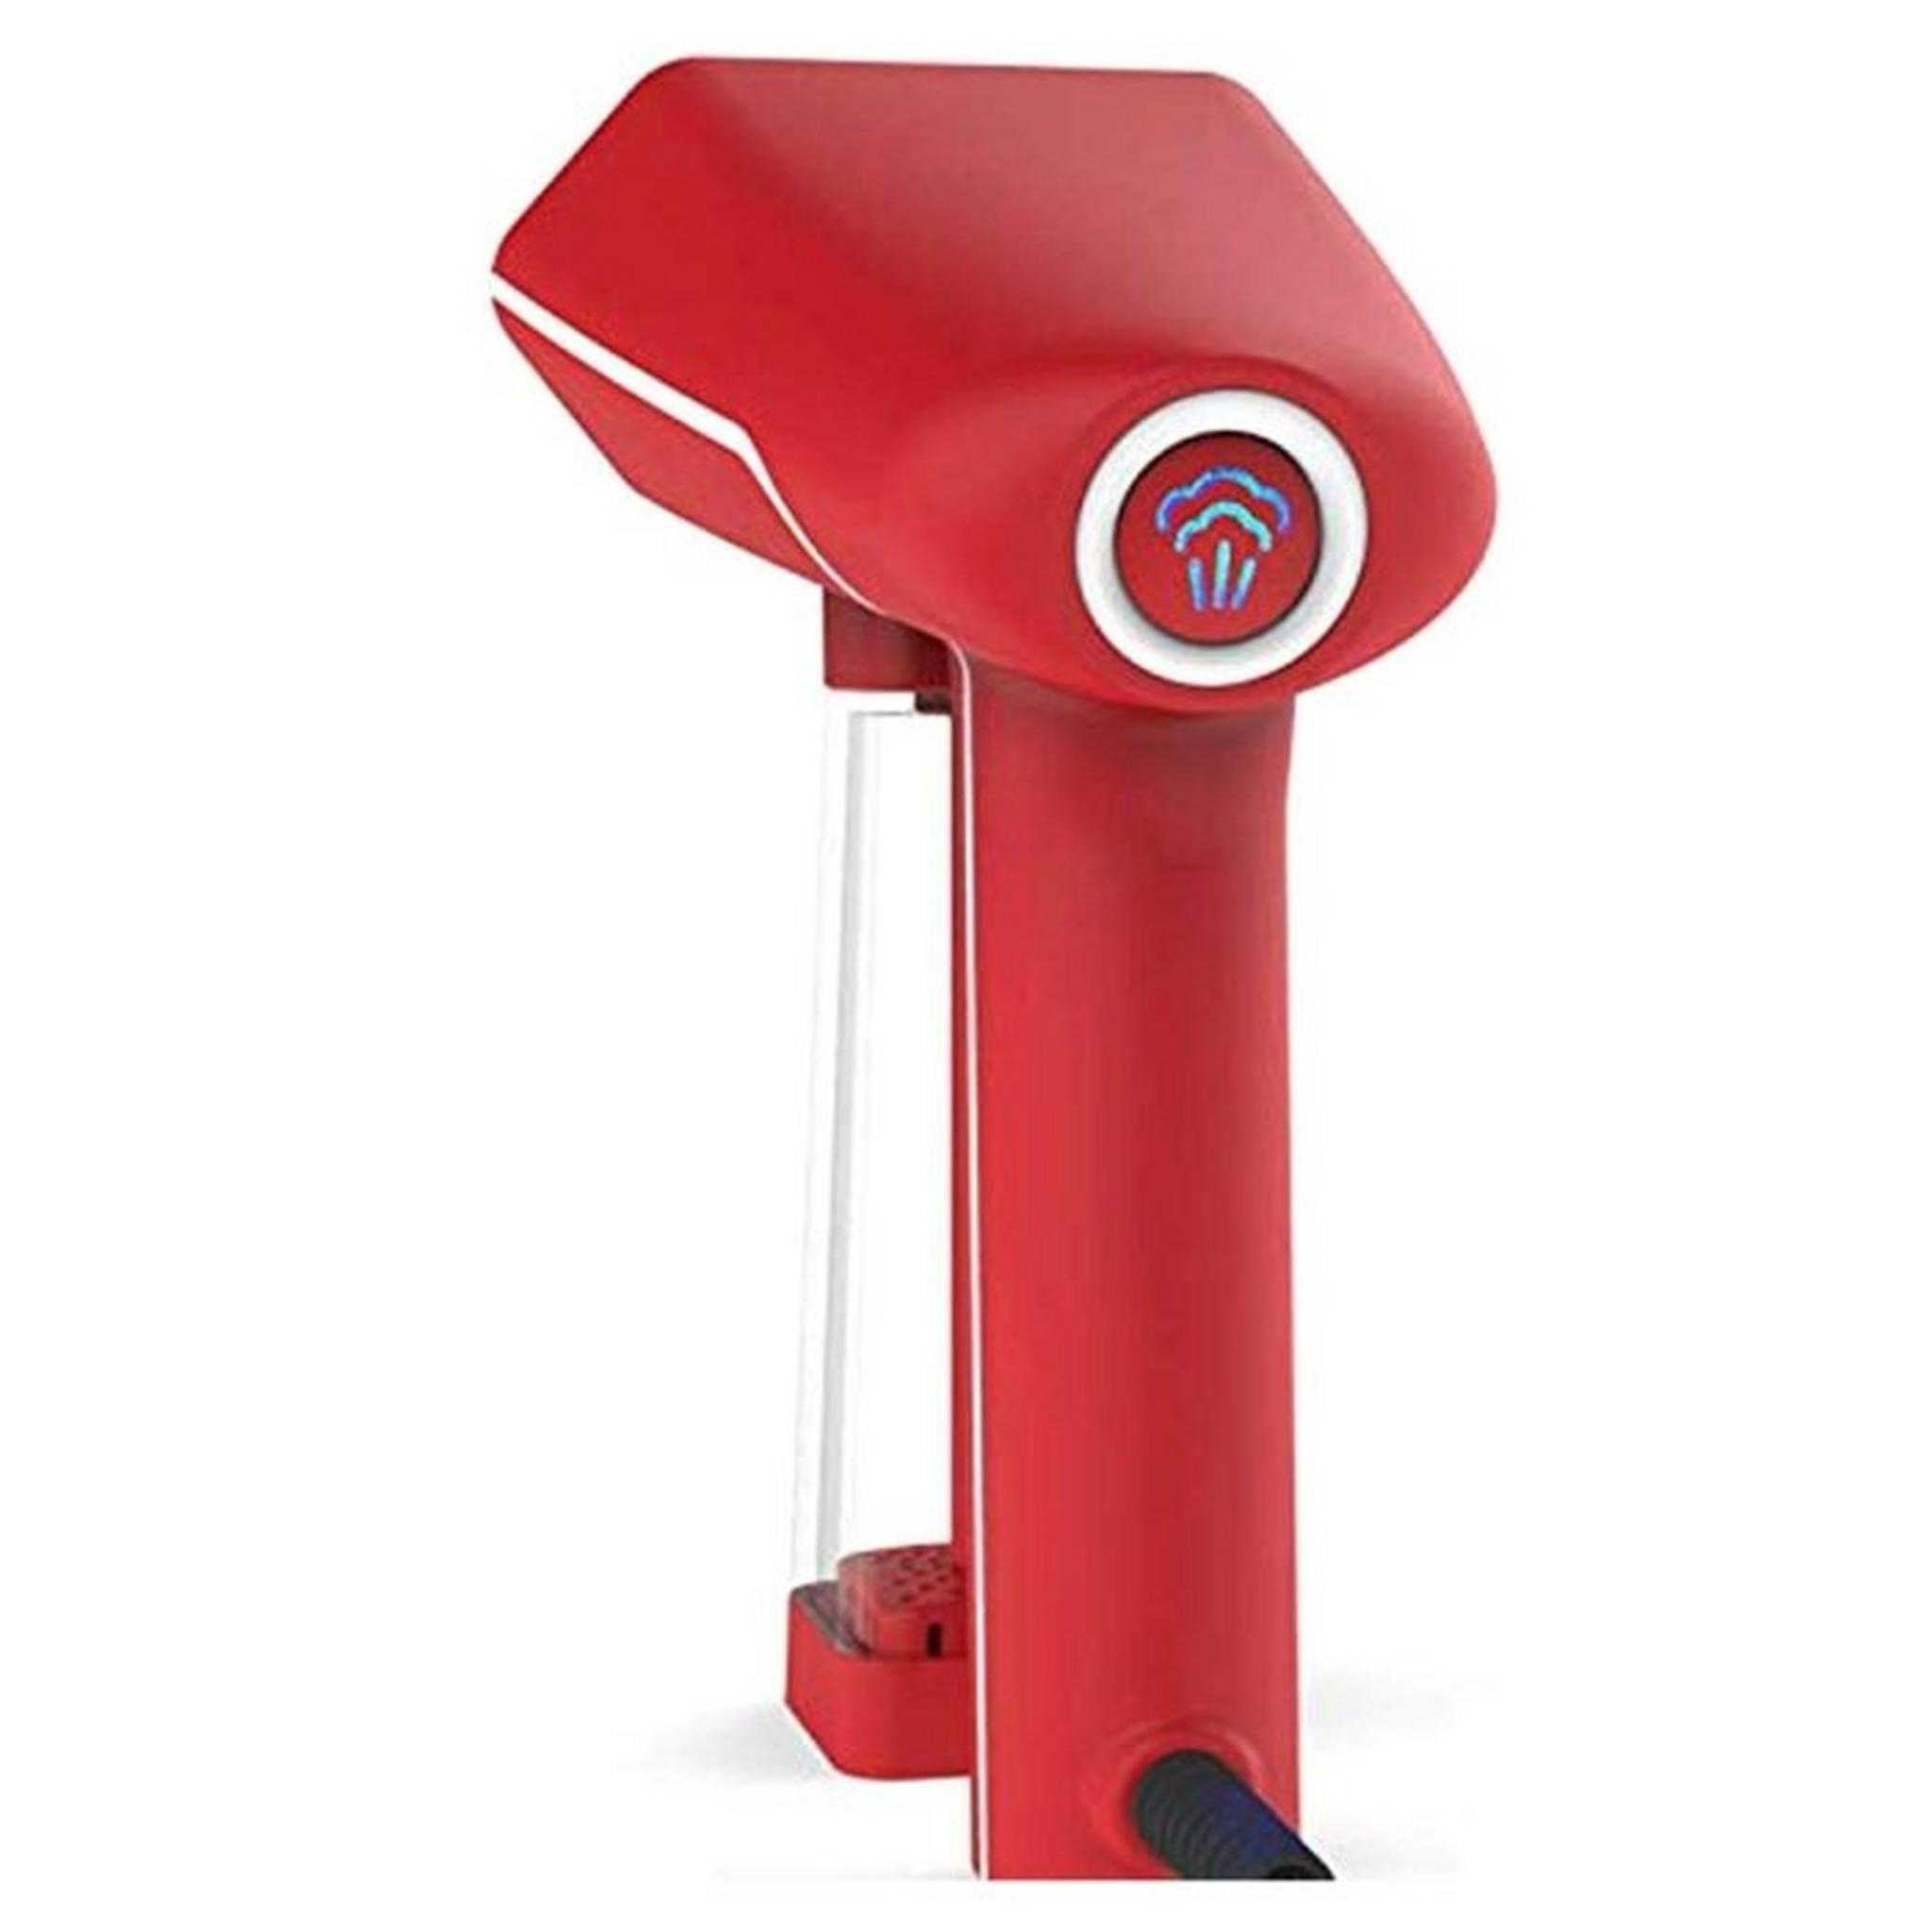 SteamOne Snomad Garment Steamer Red Edition 1600W (SN50RDUK)